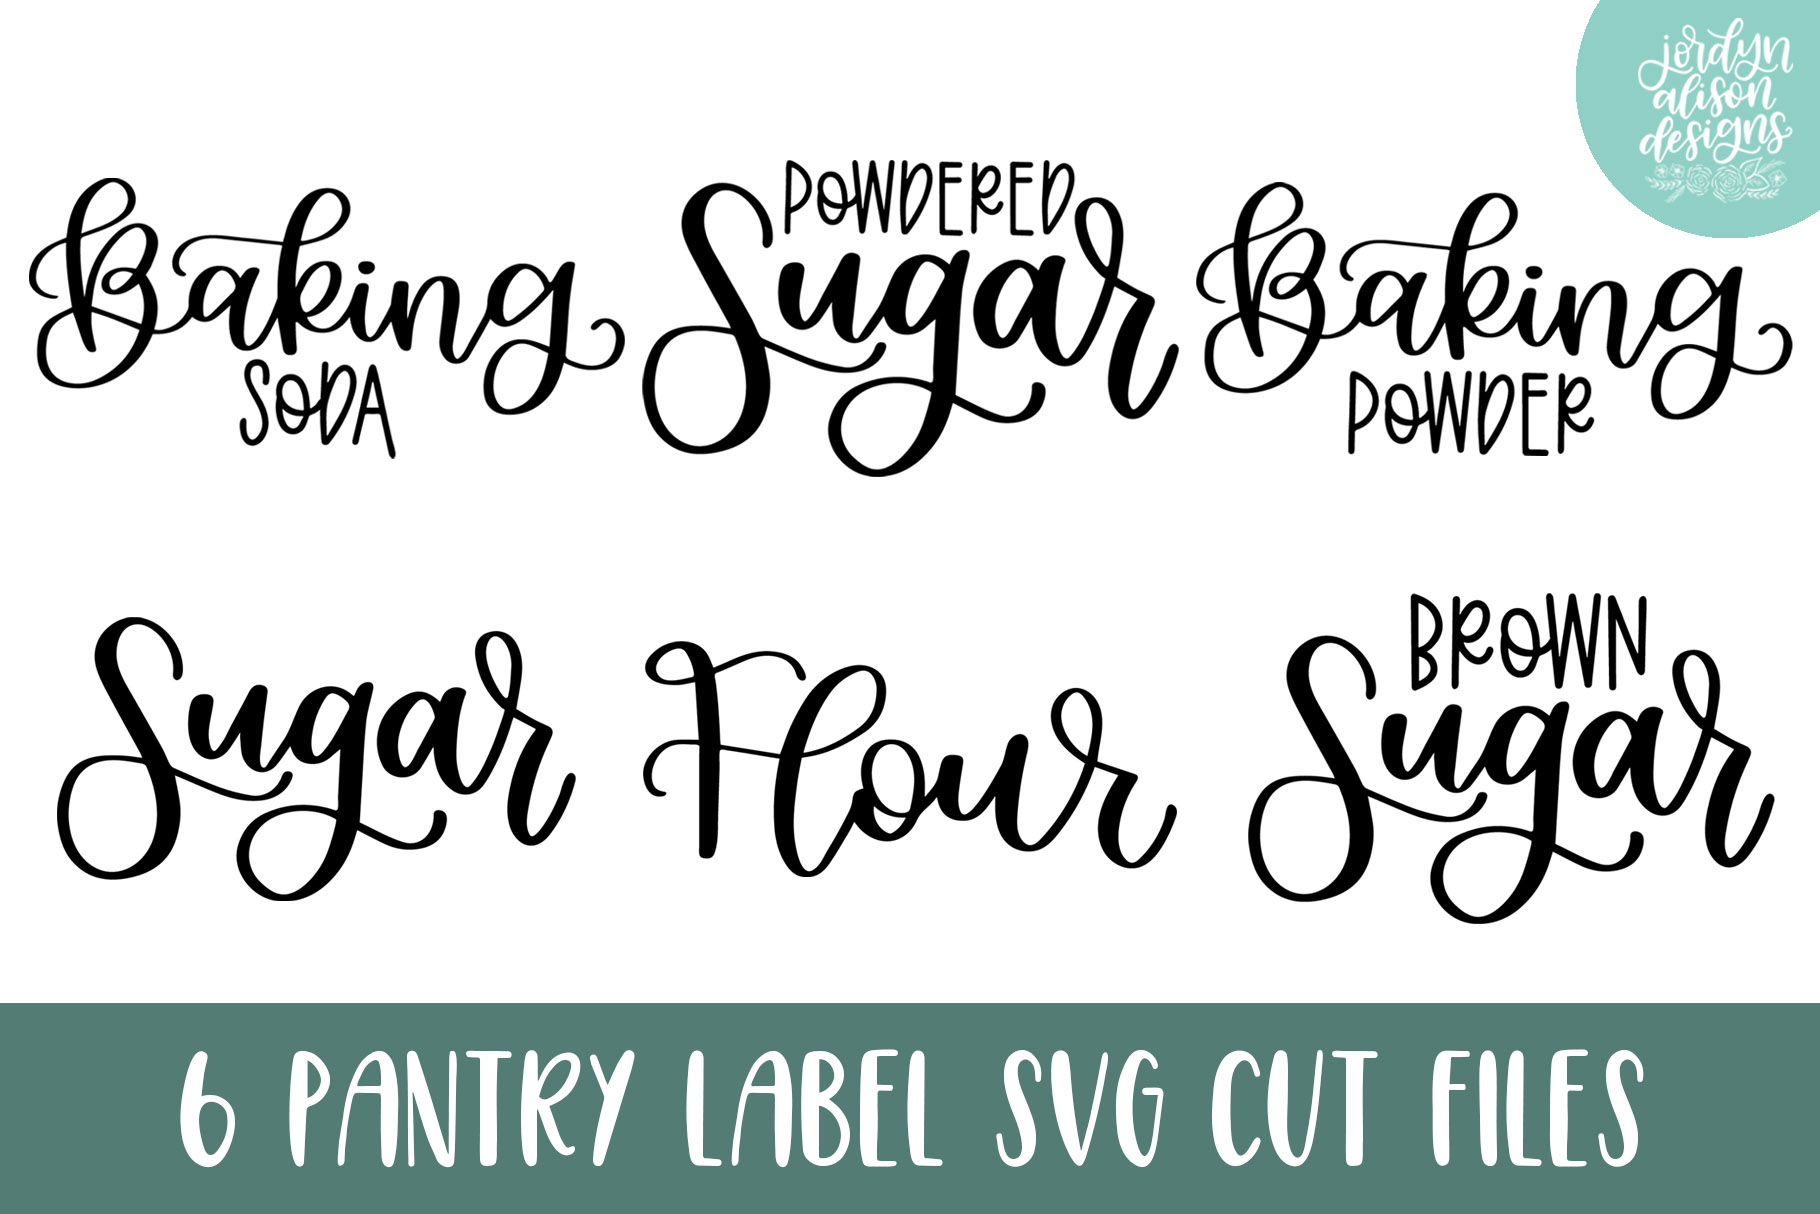 6 Pantry Label Hand Lettered SVG Cut Files, Baking (258187 ...